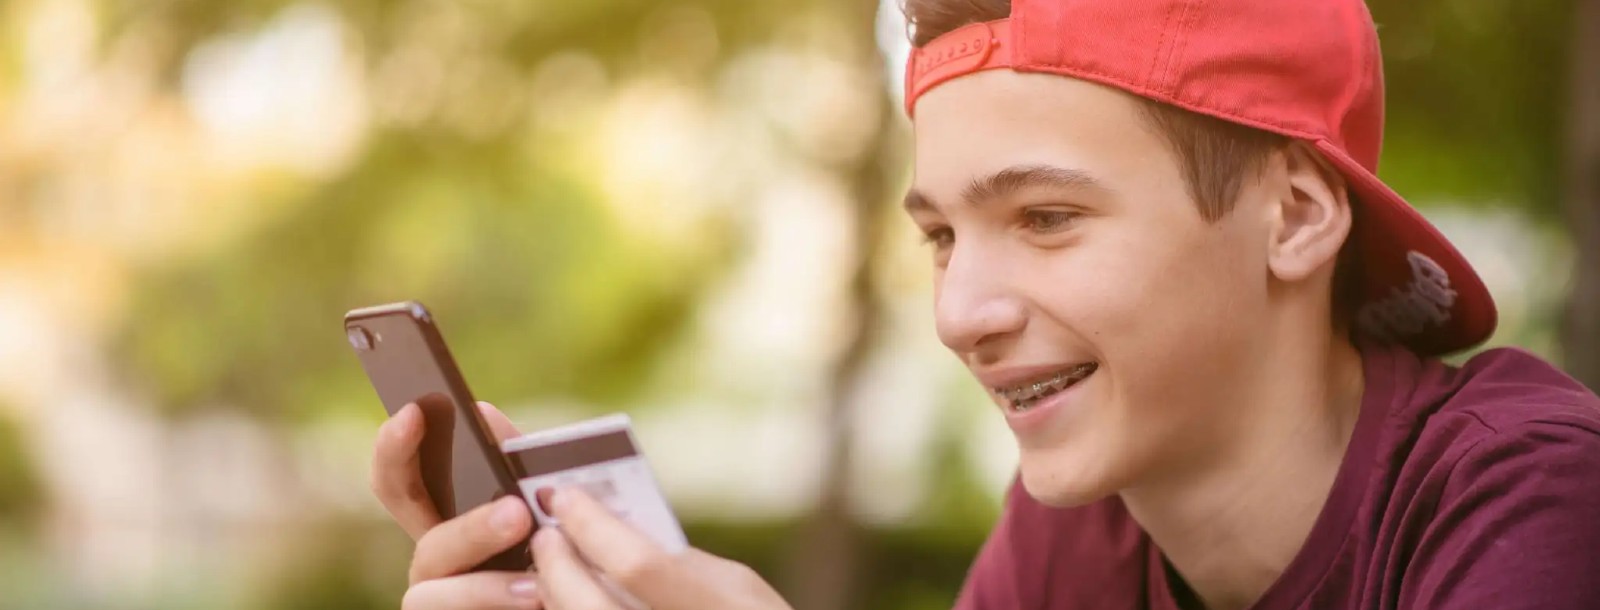 teen boy with a smartphone and a plastic card in his hands